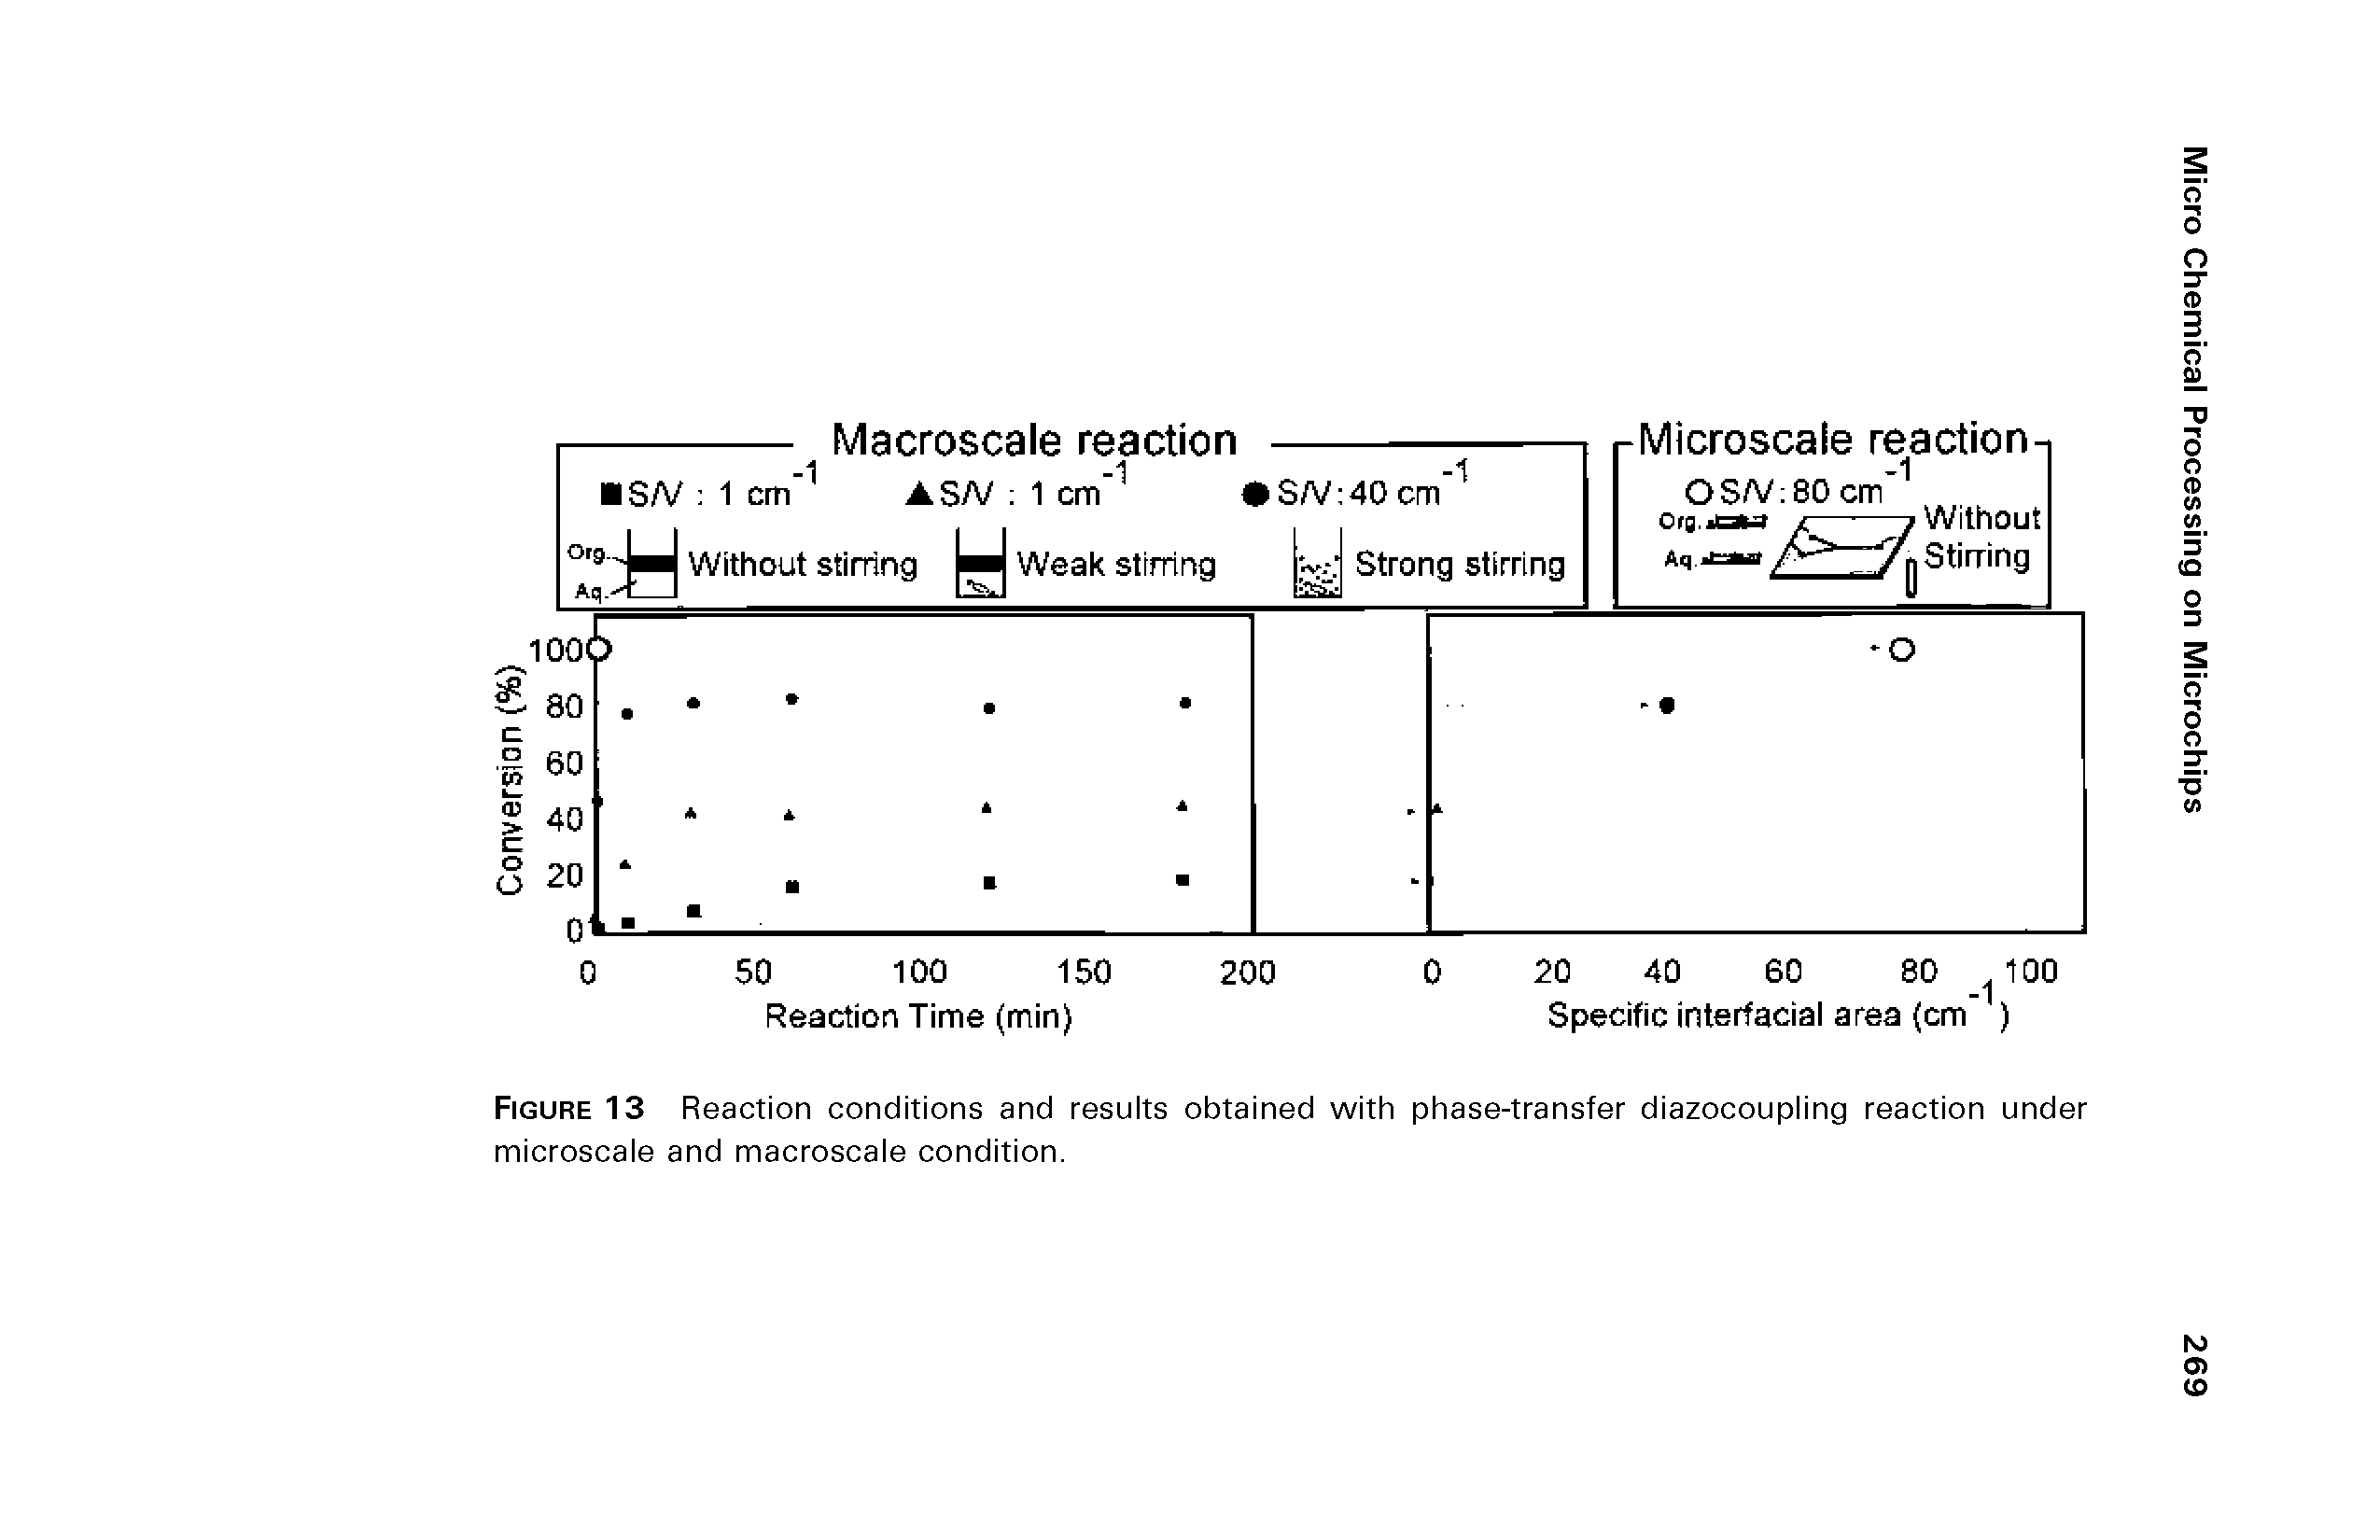 Figure 13 Reaction conditions and results obtained with phase-transfer diazocoupling reaction under microscale and macroscale condition.